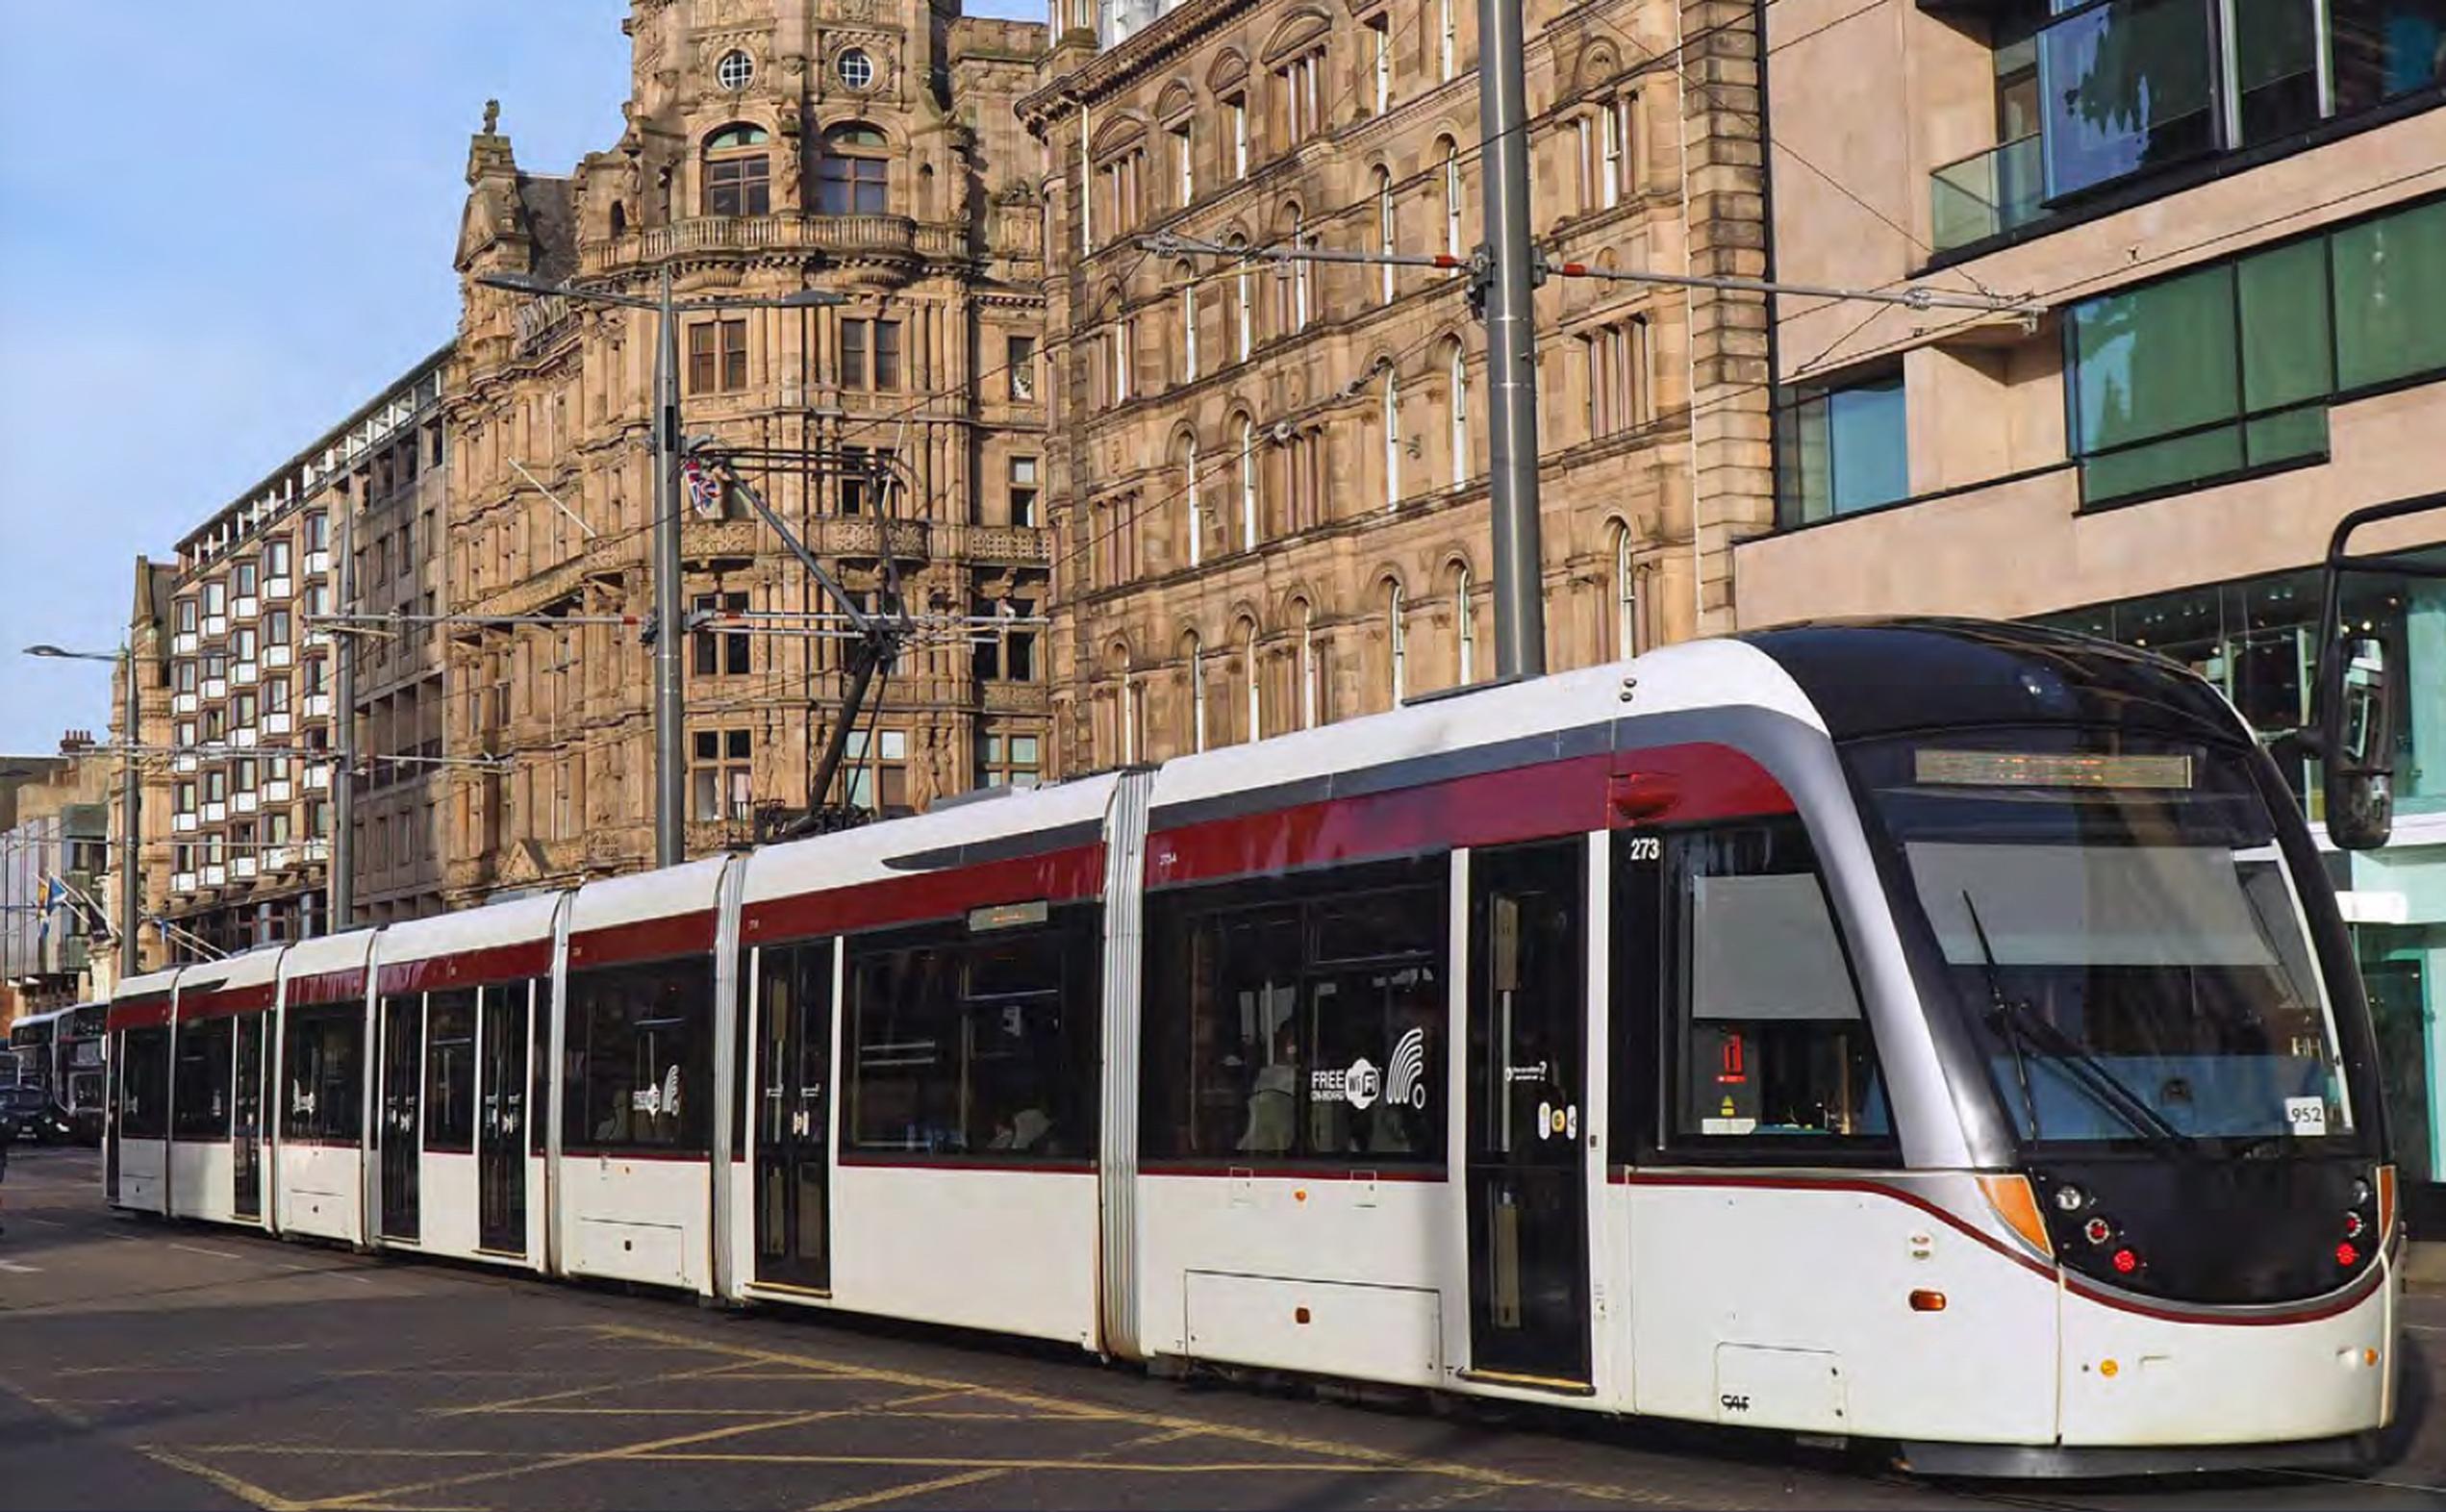 The Edinburgh Tram Project was due to be completed in 2011, but the full route did not begin operation until June 2023